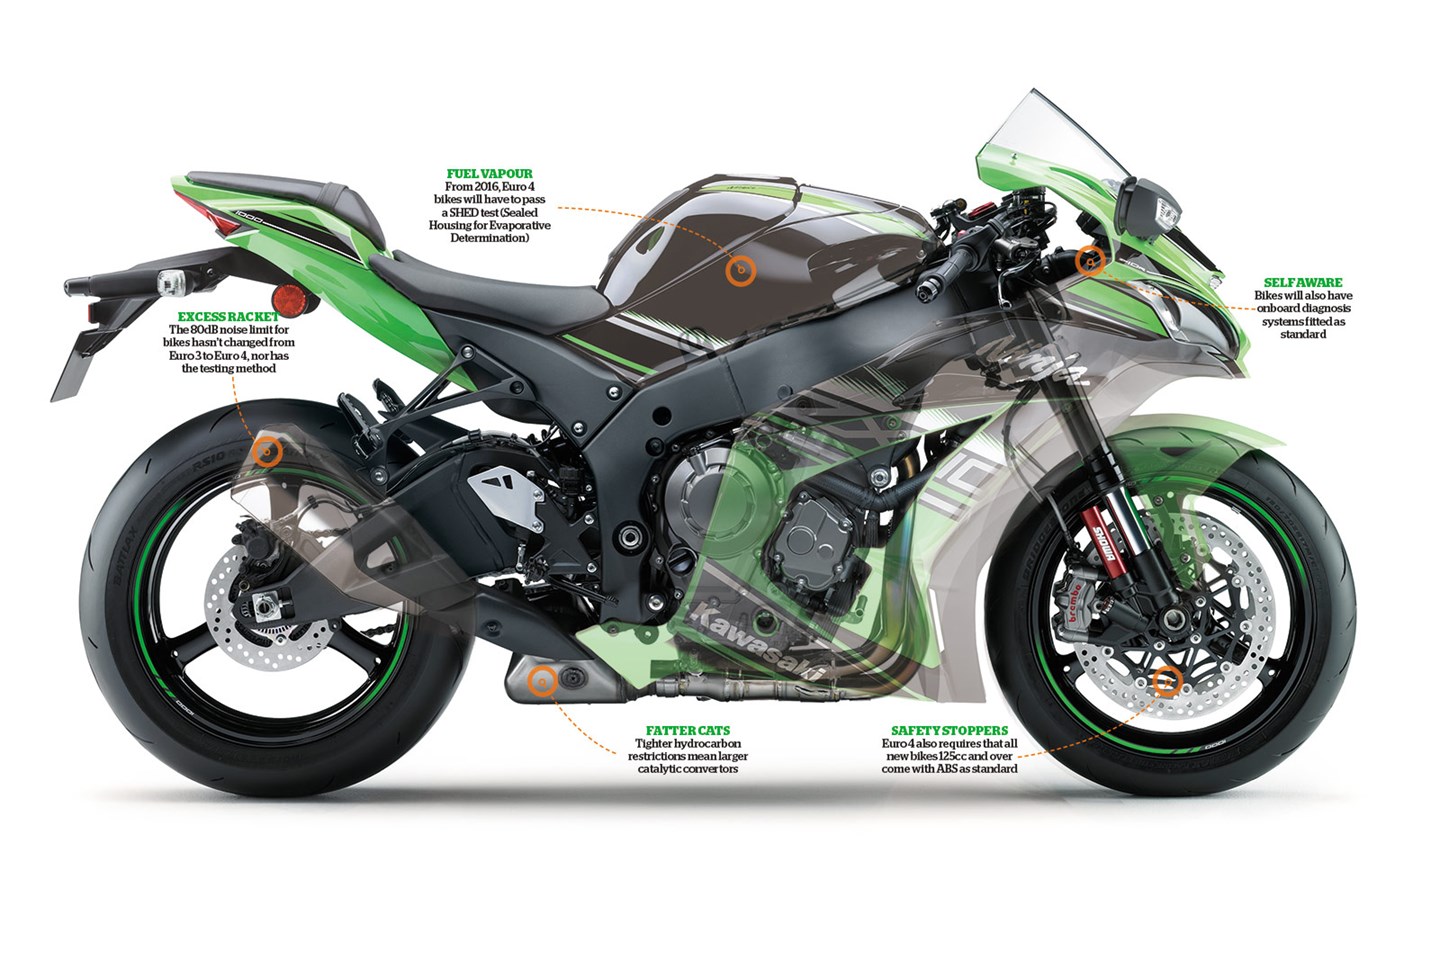 What You Need to Know About Euro 5 Emission Standards for Motorcycles